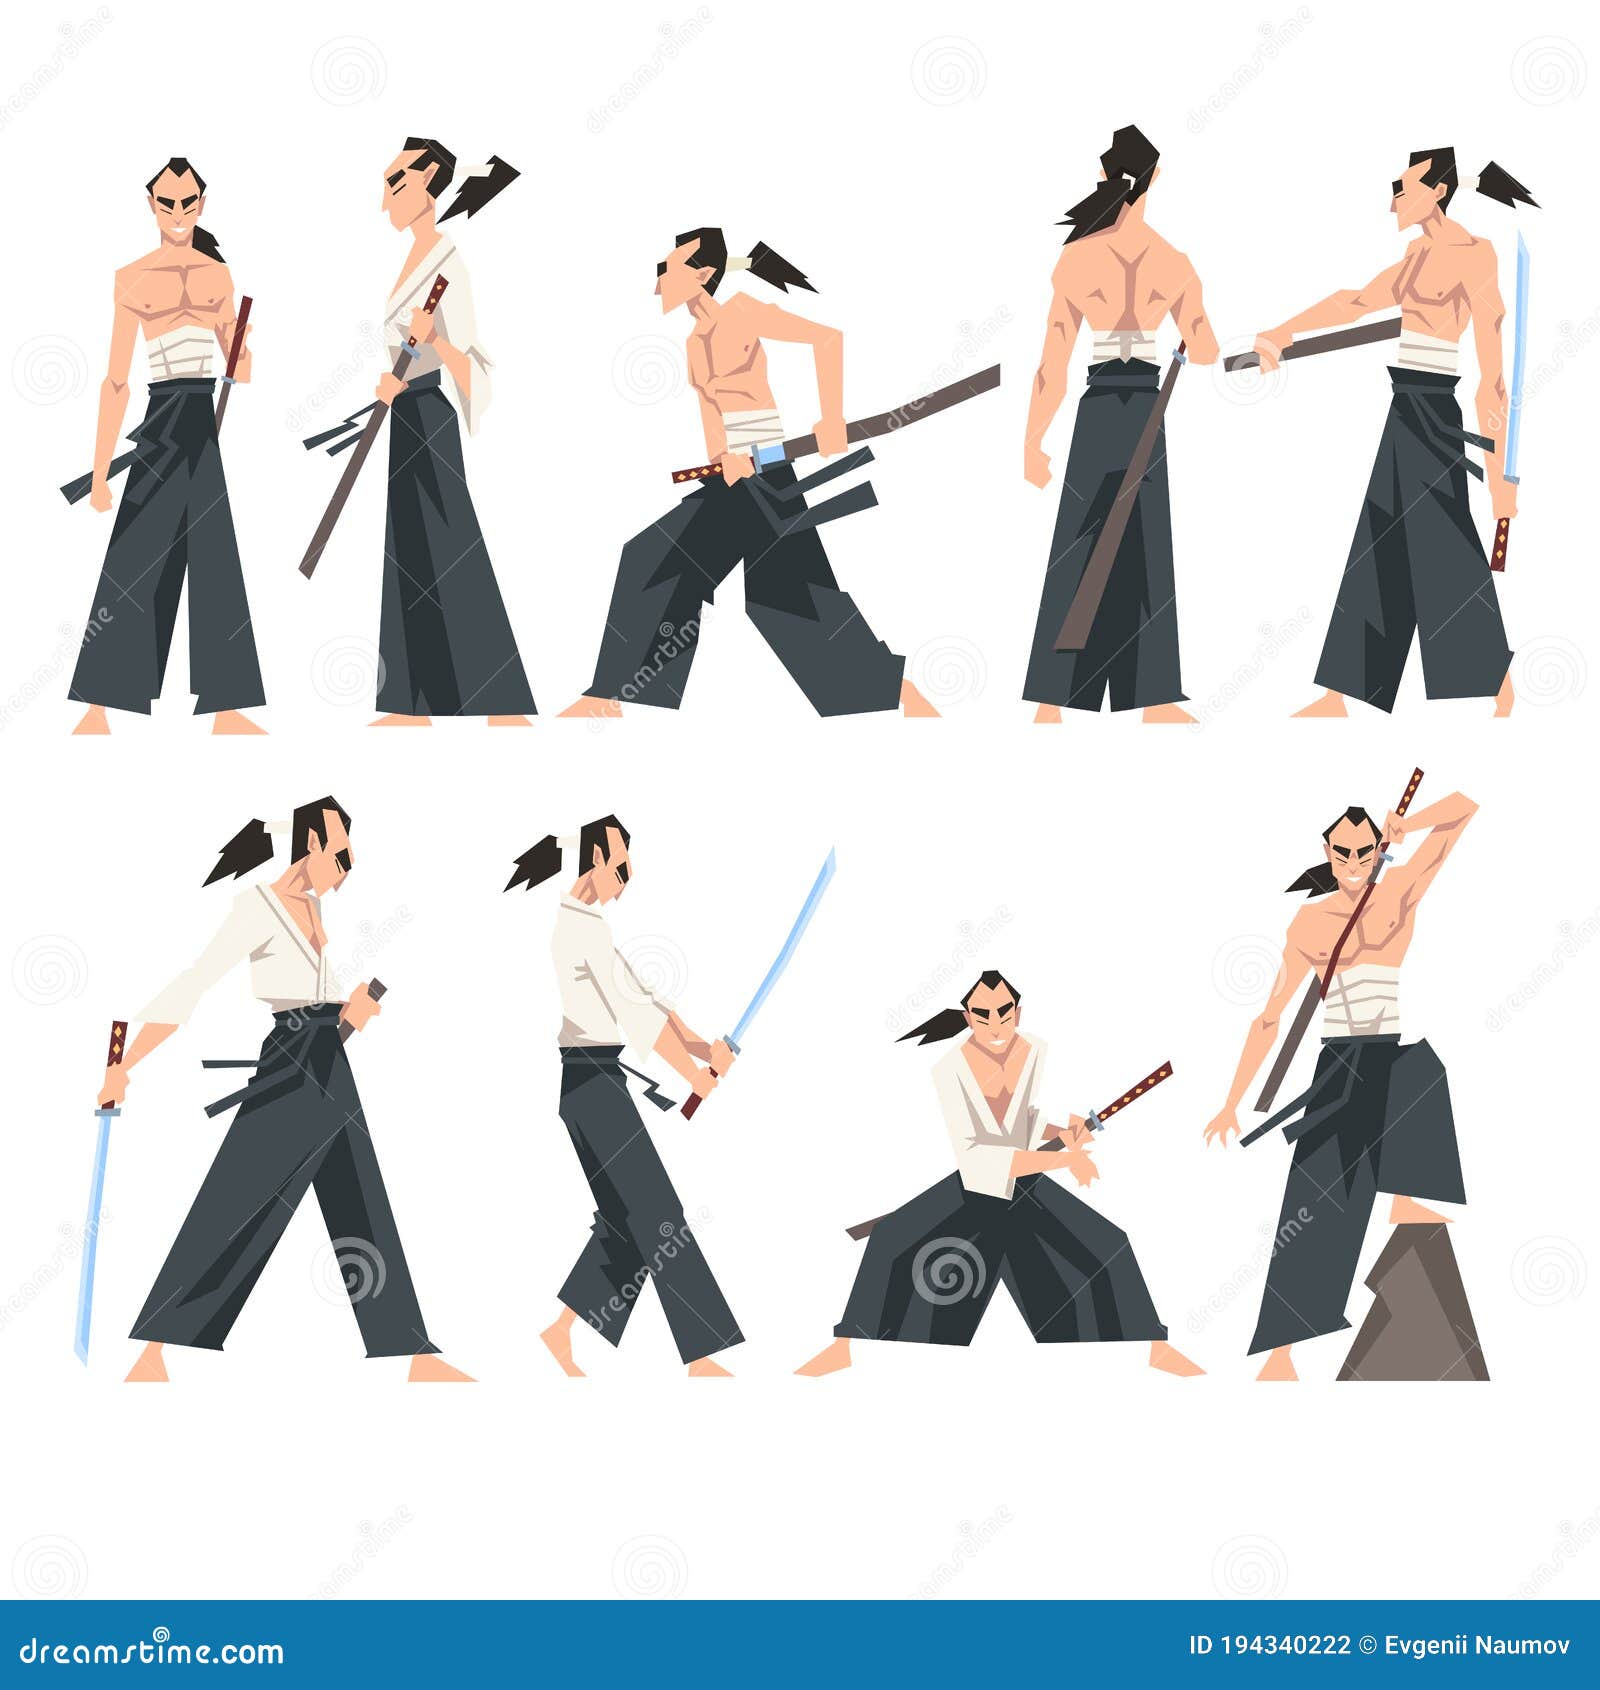 6 depth pose of a man holding sword - v1.0 | Stable Diffusion Poses |  Civitai